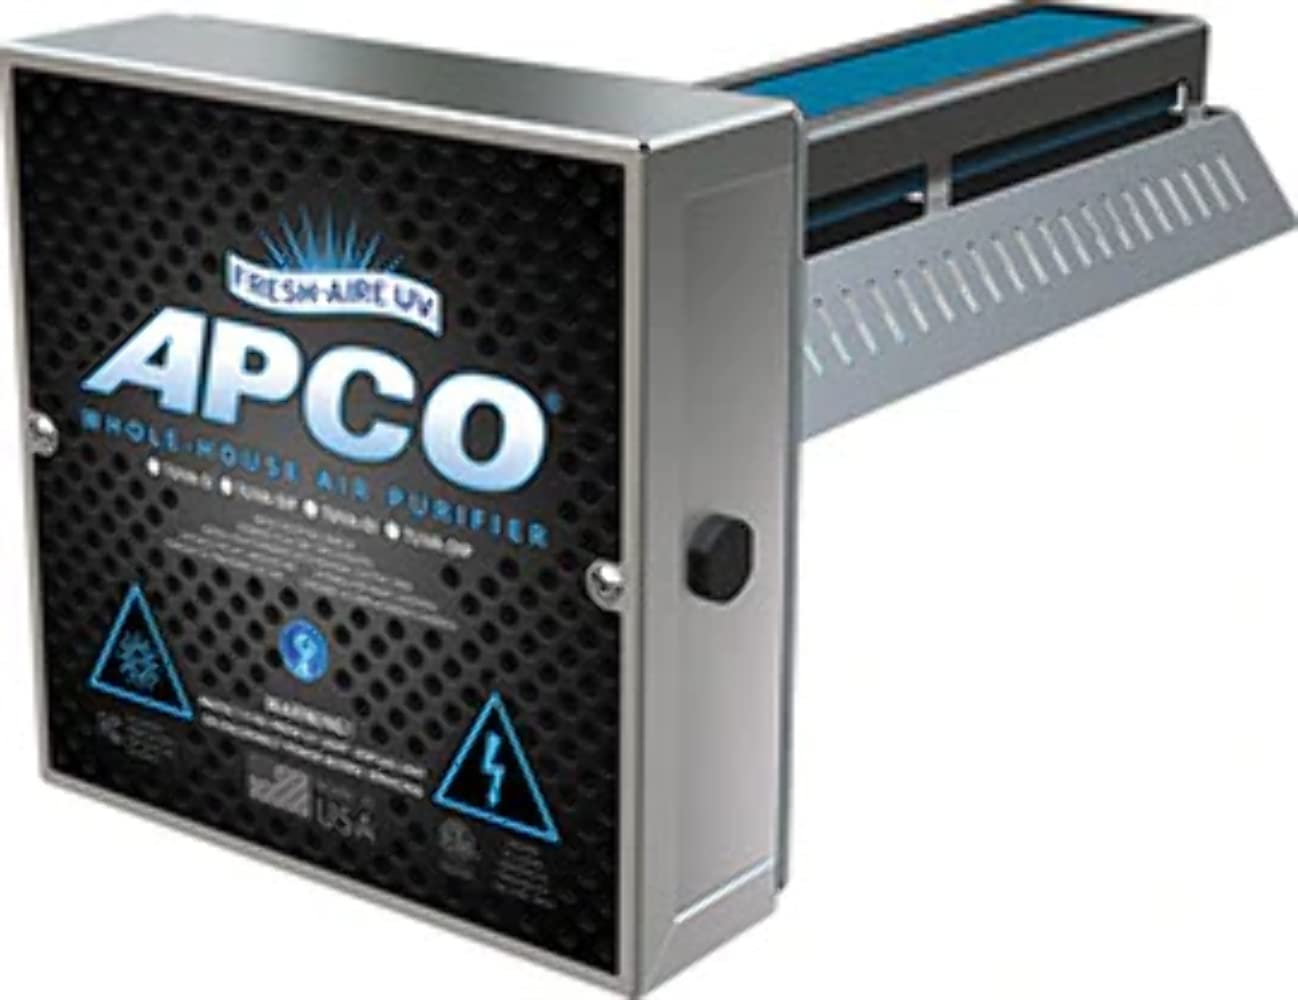 APCO/PCO with 2-Year Lamp (18-32 VAC Series) # TUV-APCO-ER2 in-Duct System